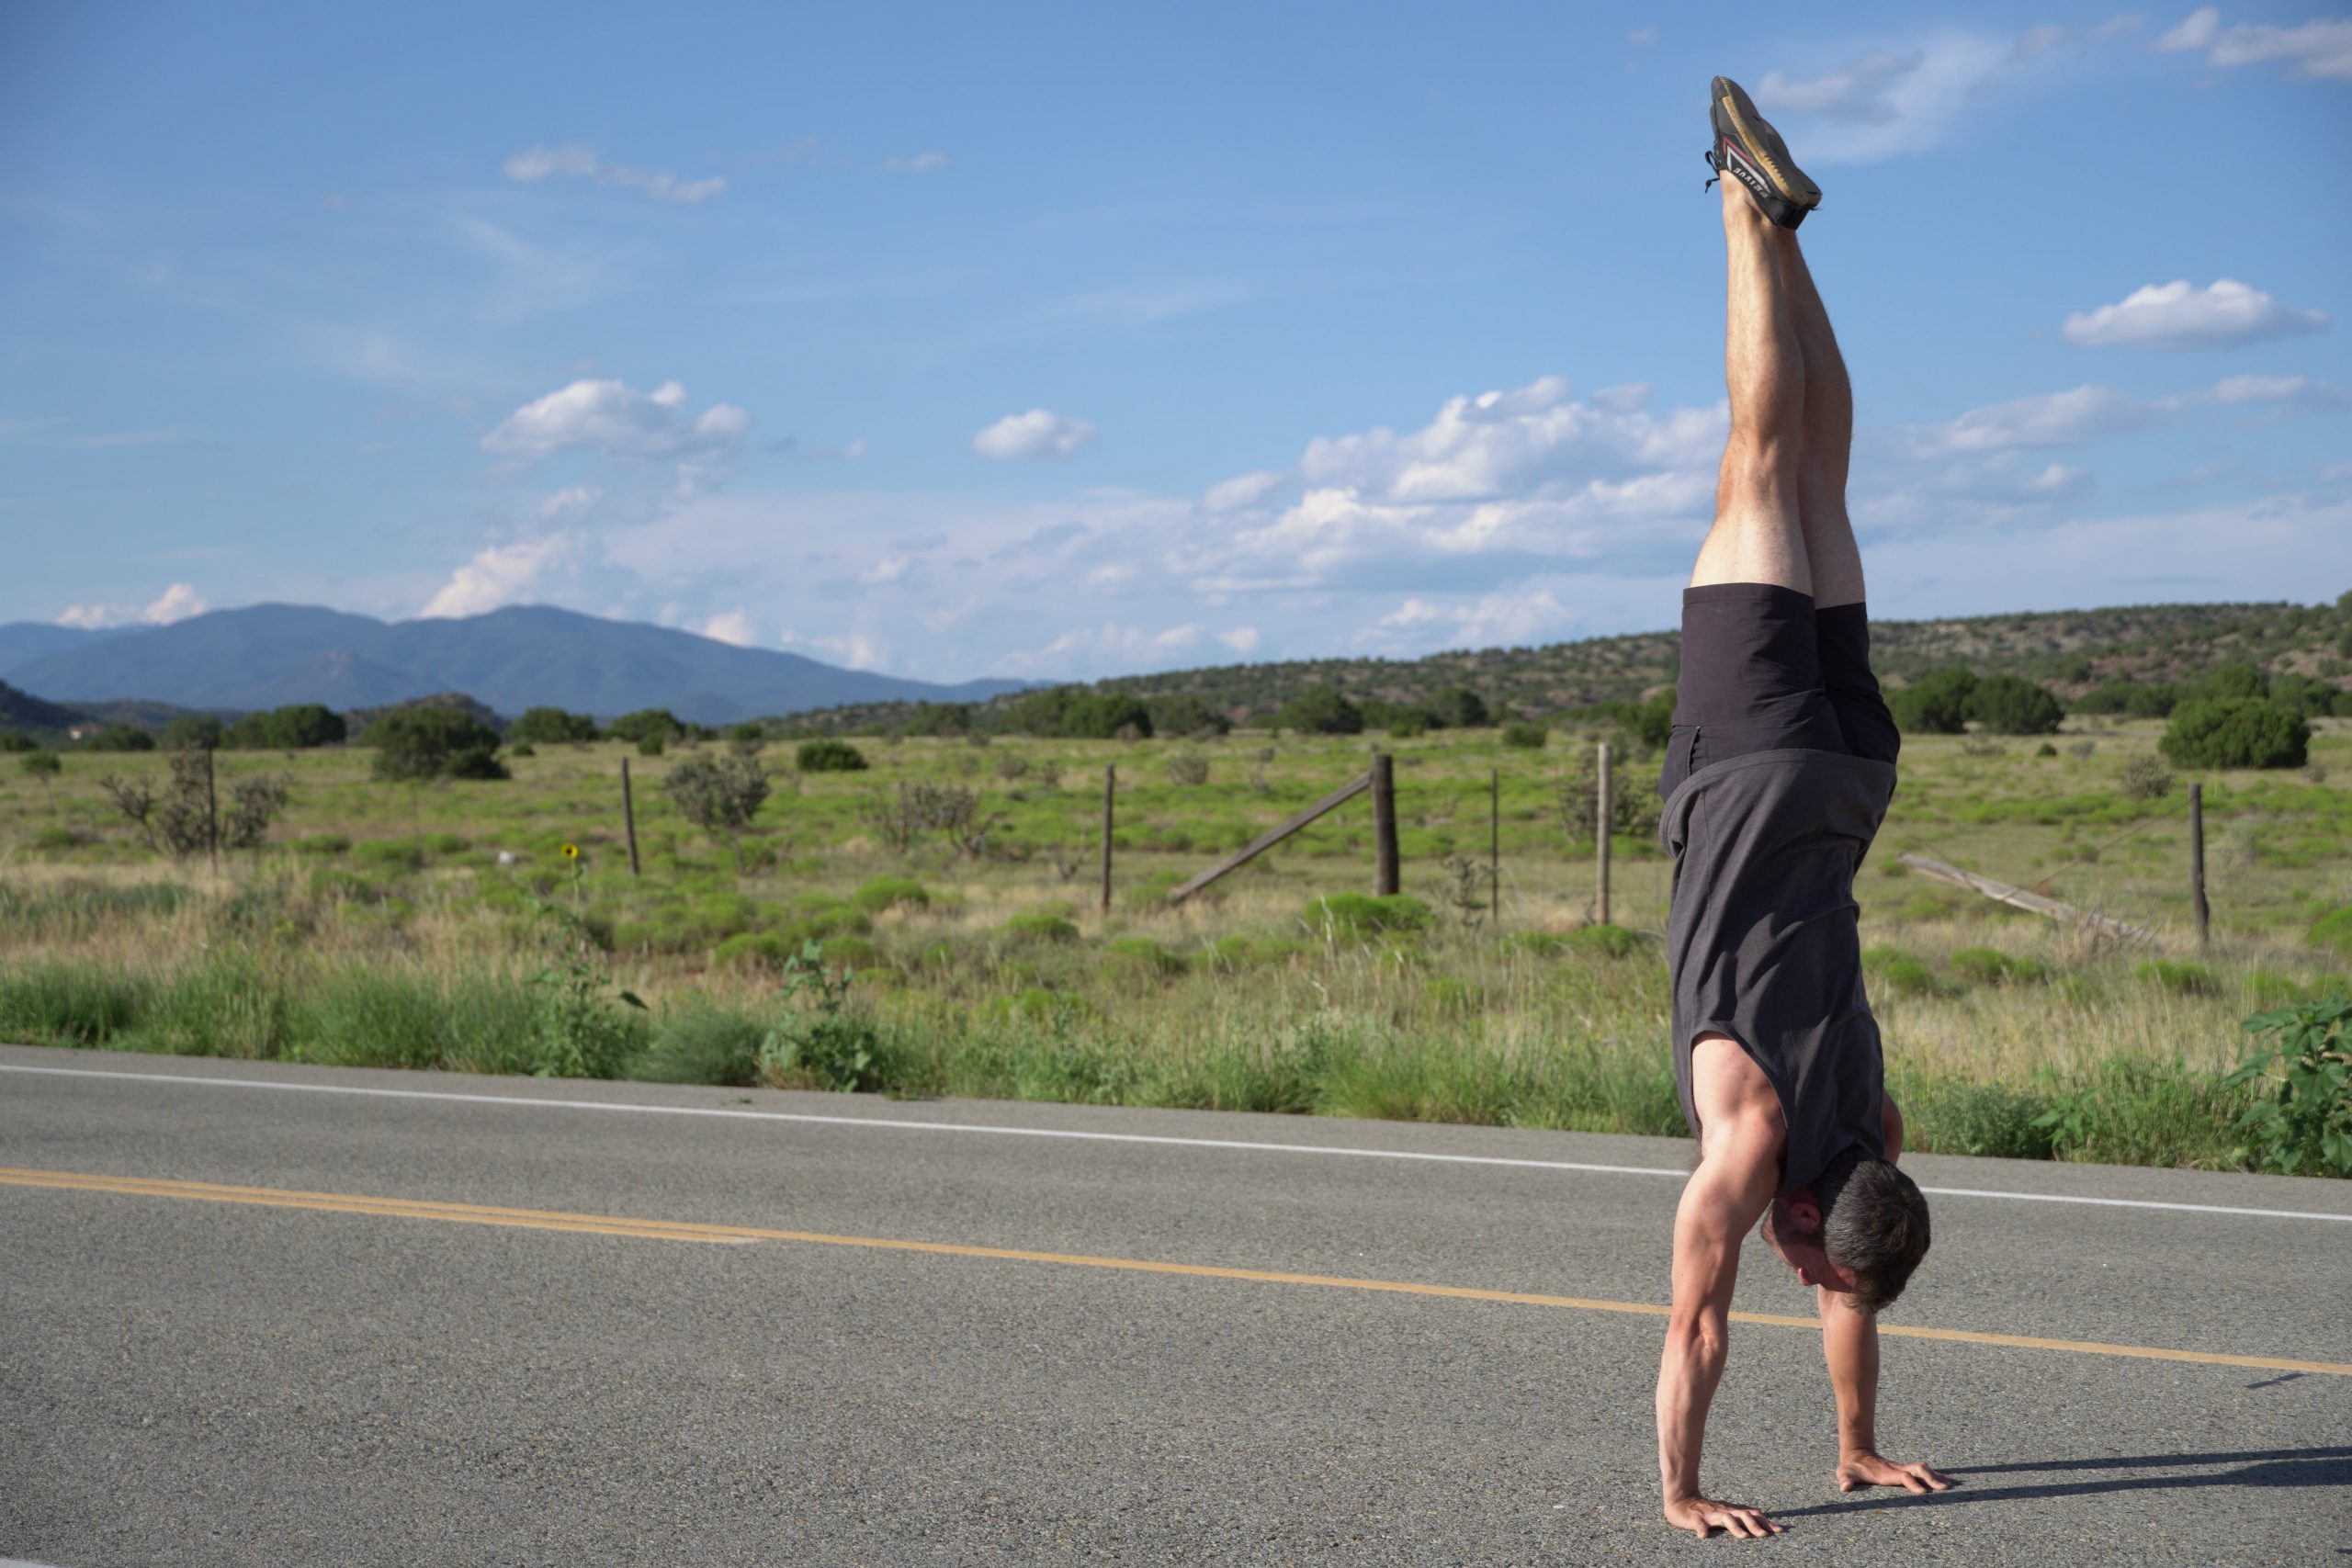 Le handstand